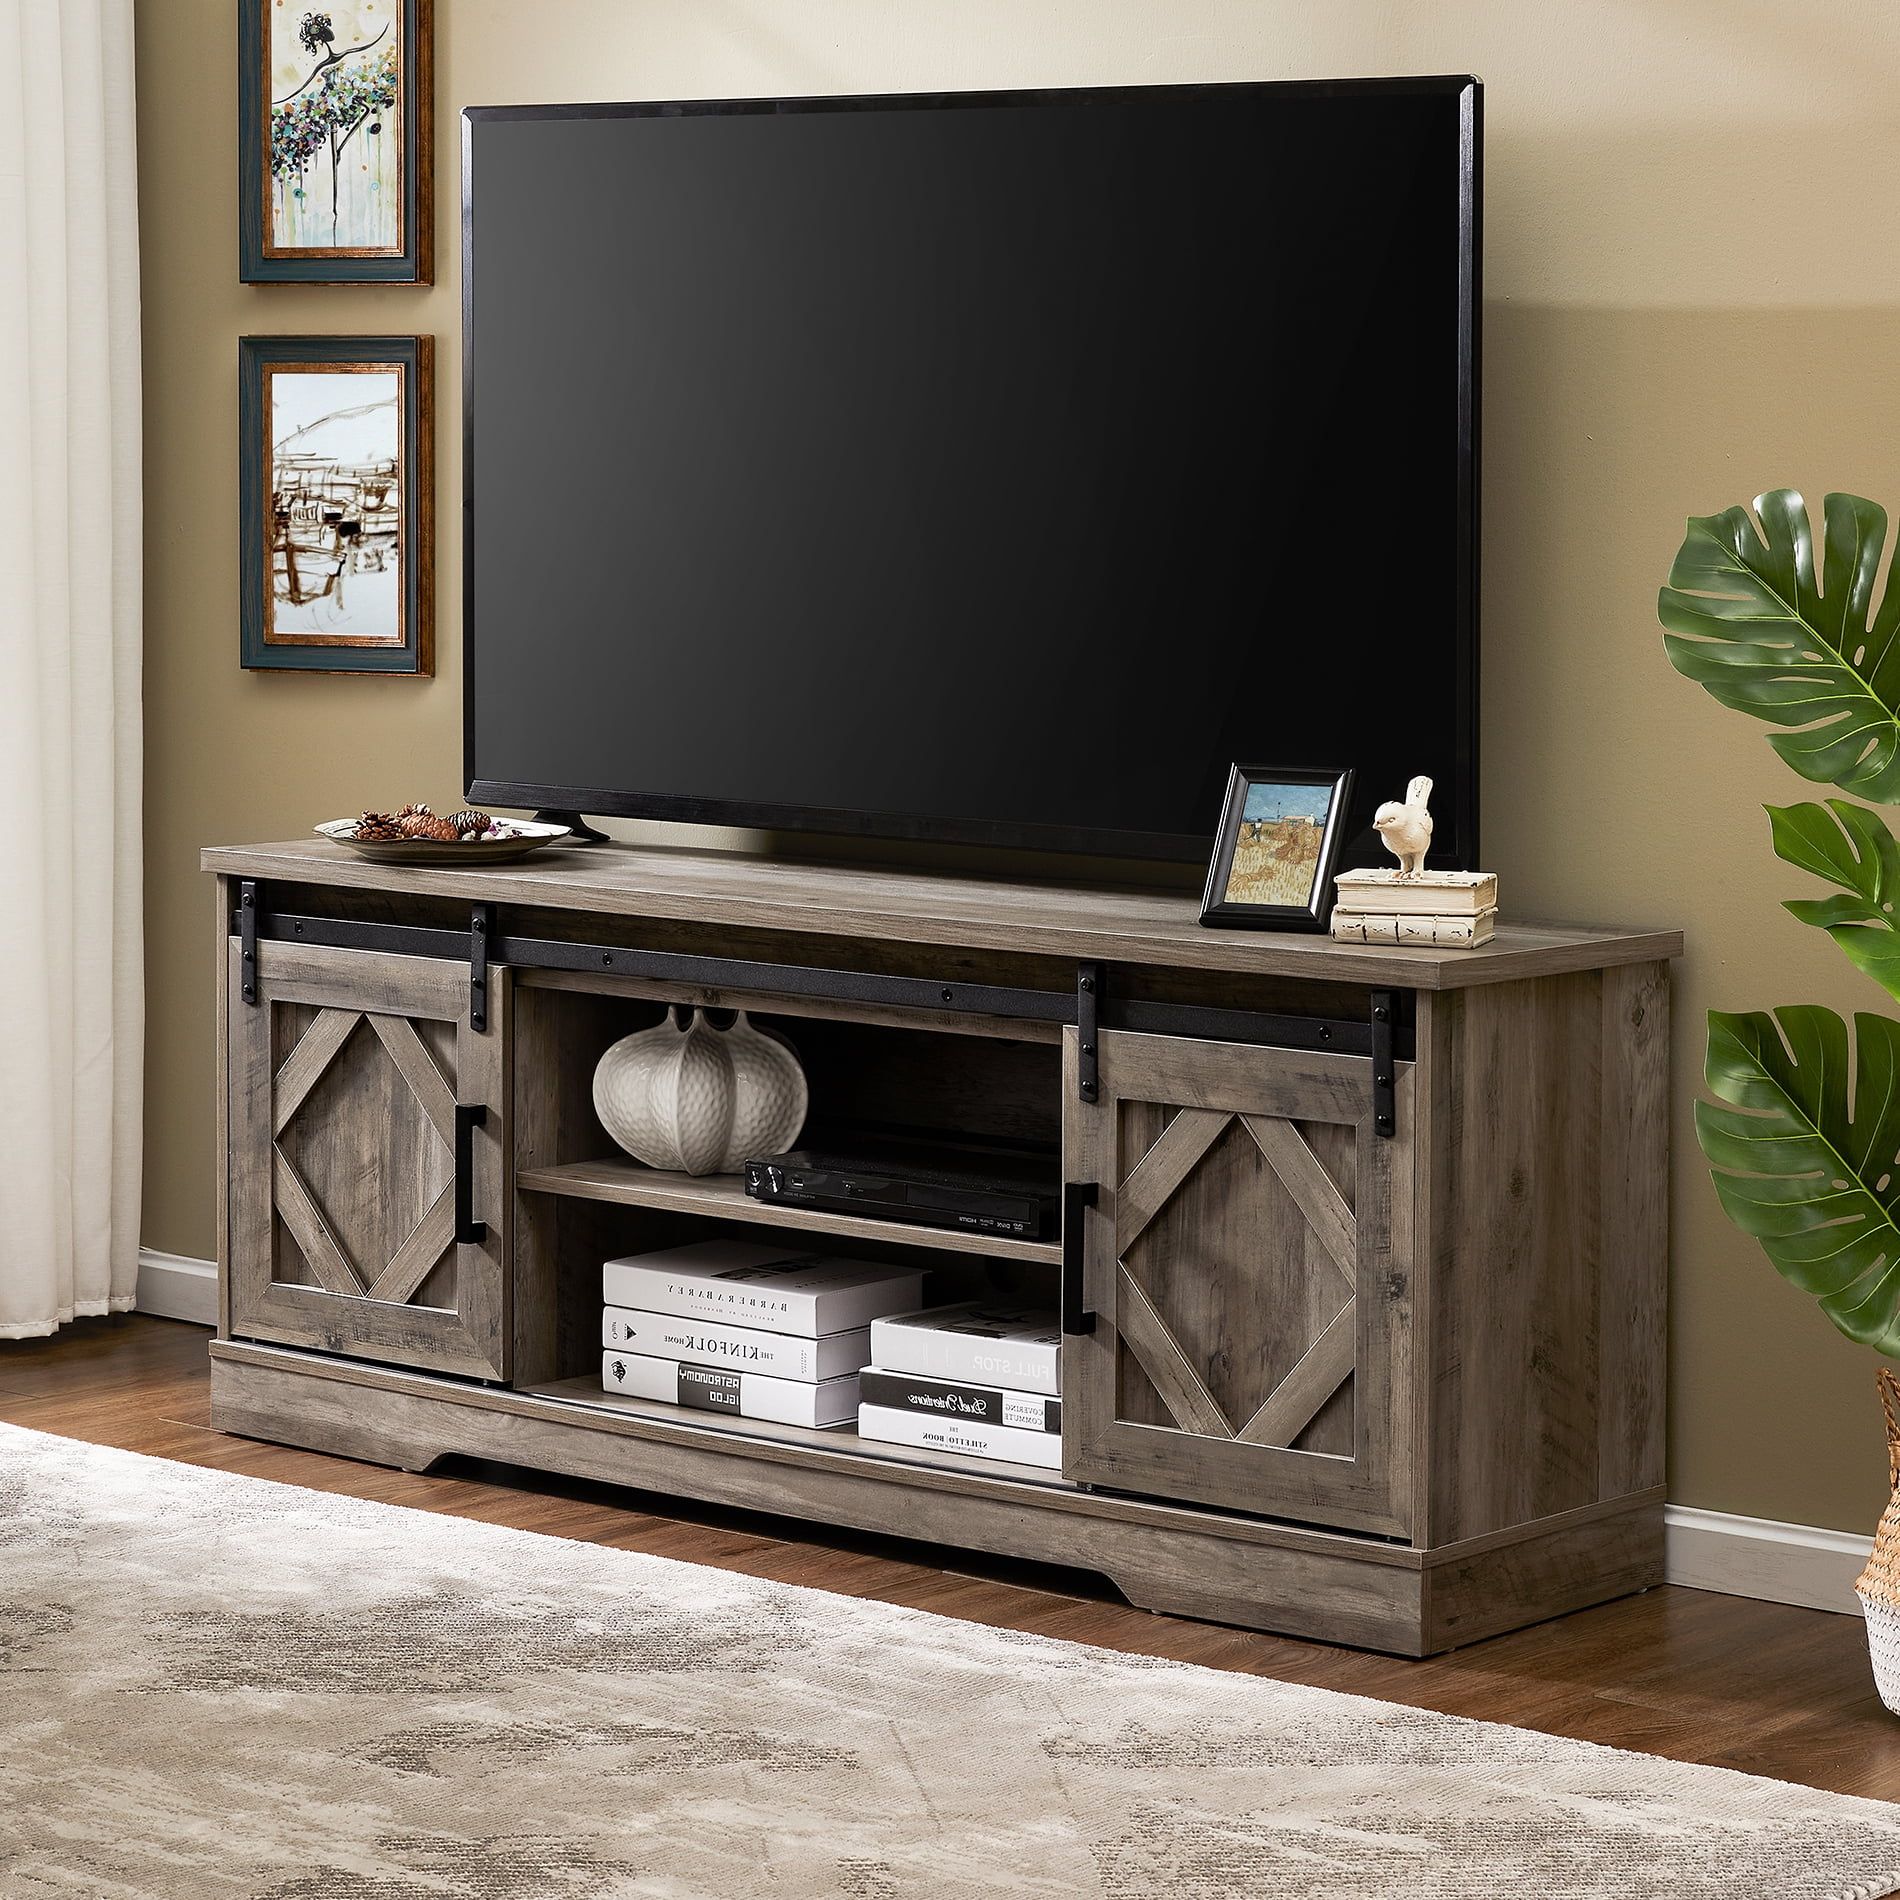 Buy Wampat Farmhouse Tv Stand For Tv Up To 70 Barn Door Media Console Inside Barn Door Media Tv Stands (View 5 of 20)